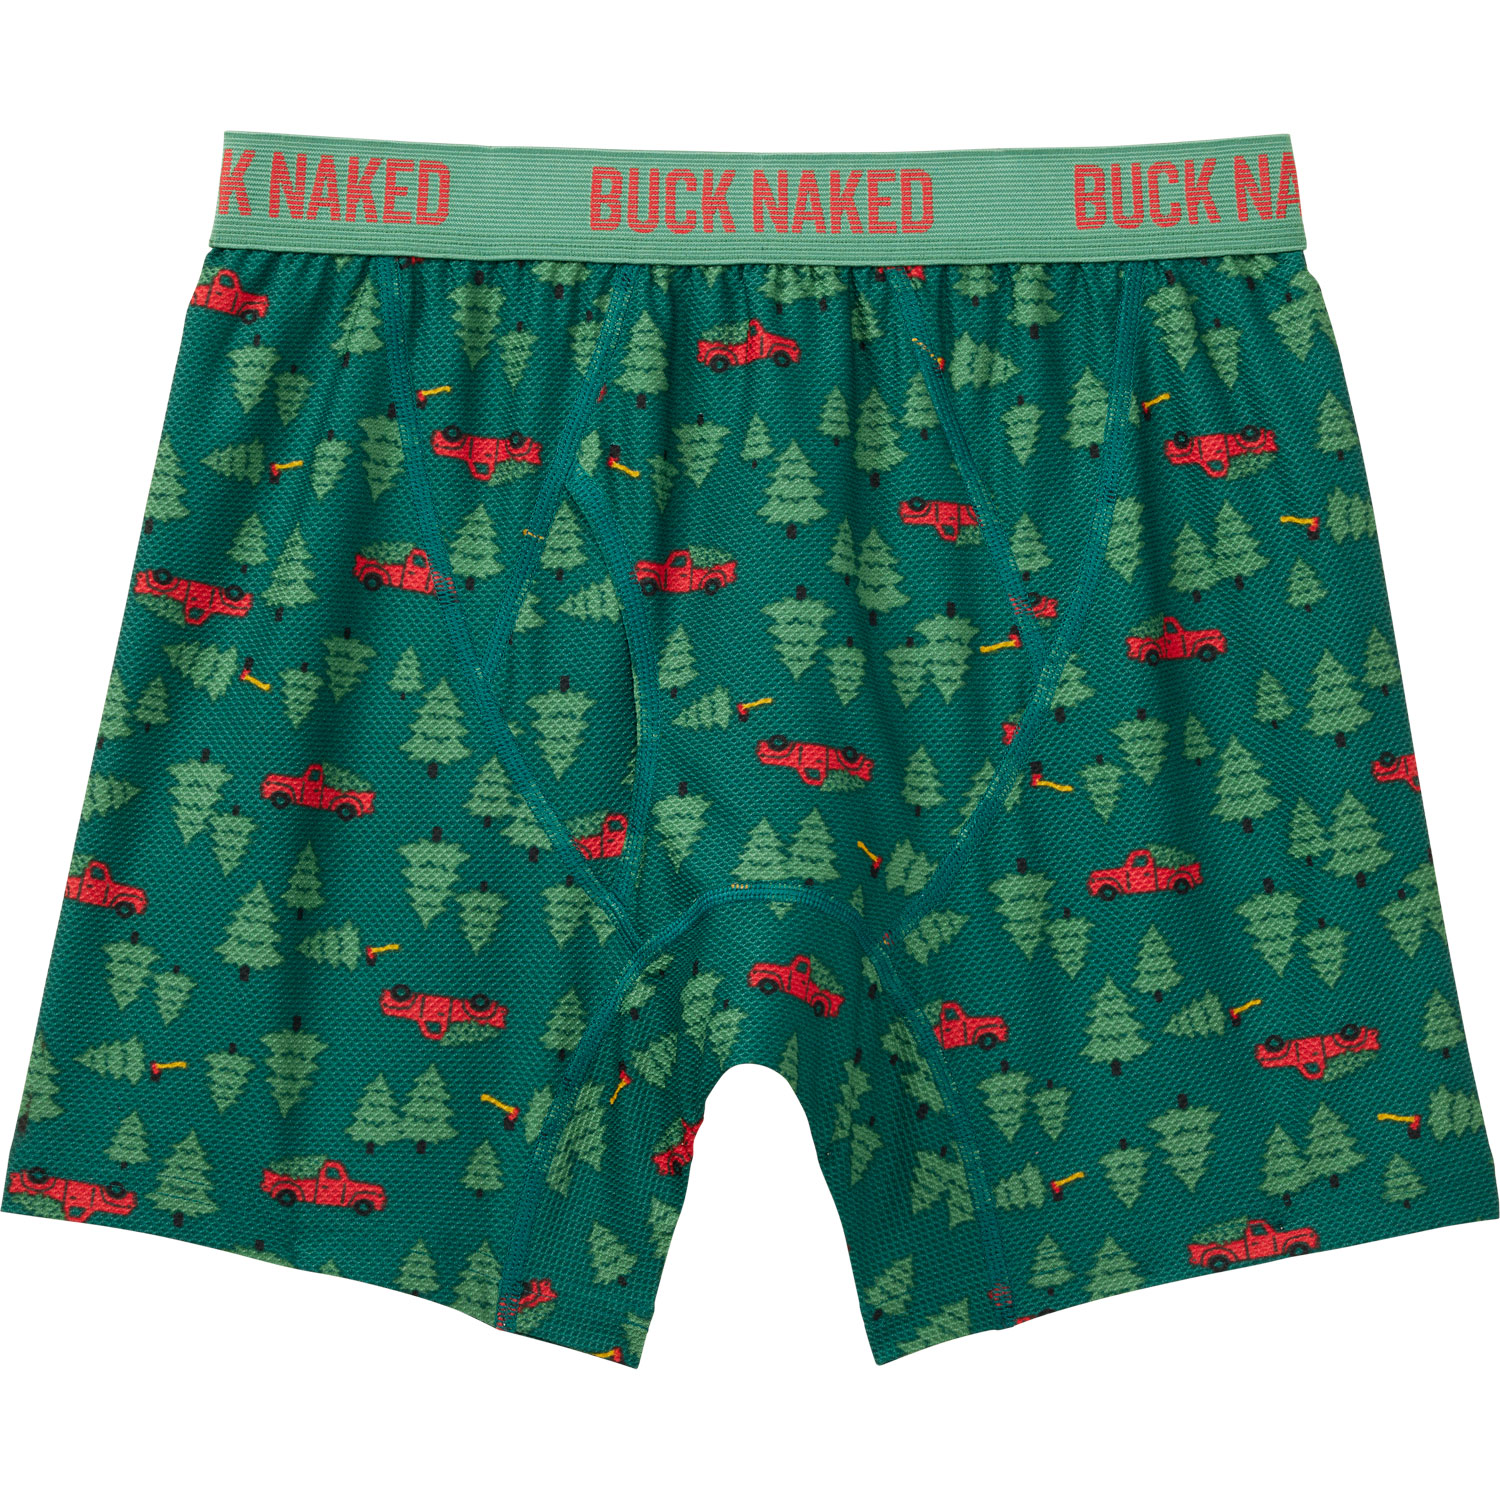 1 Pair Duluth Trading Co Buck Naked Boxer Briefs Kingfisher Blue 76015 2X  3X